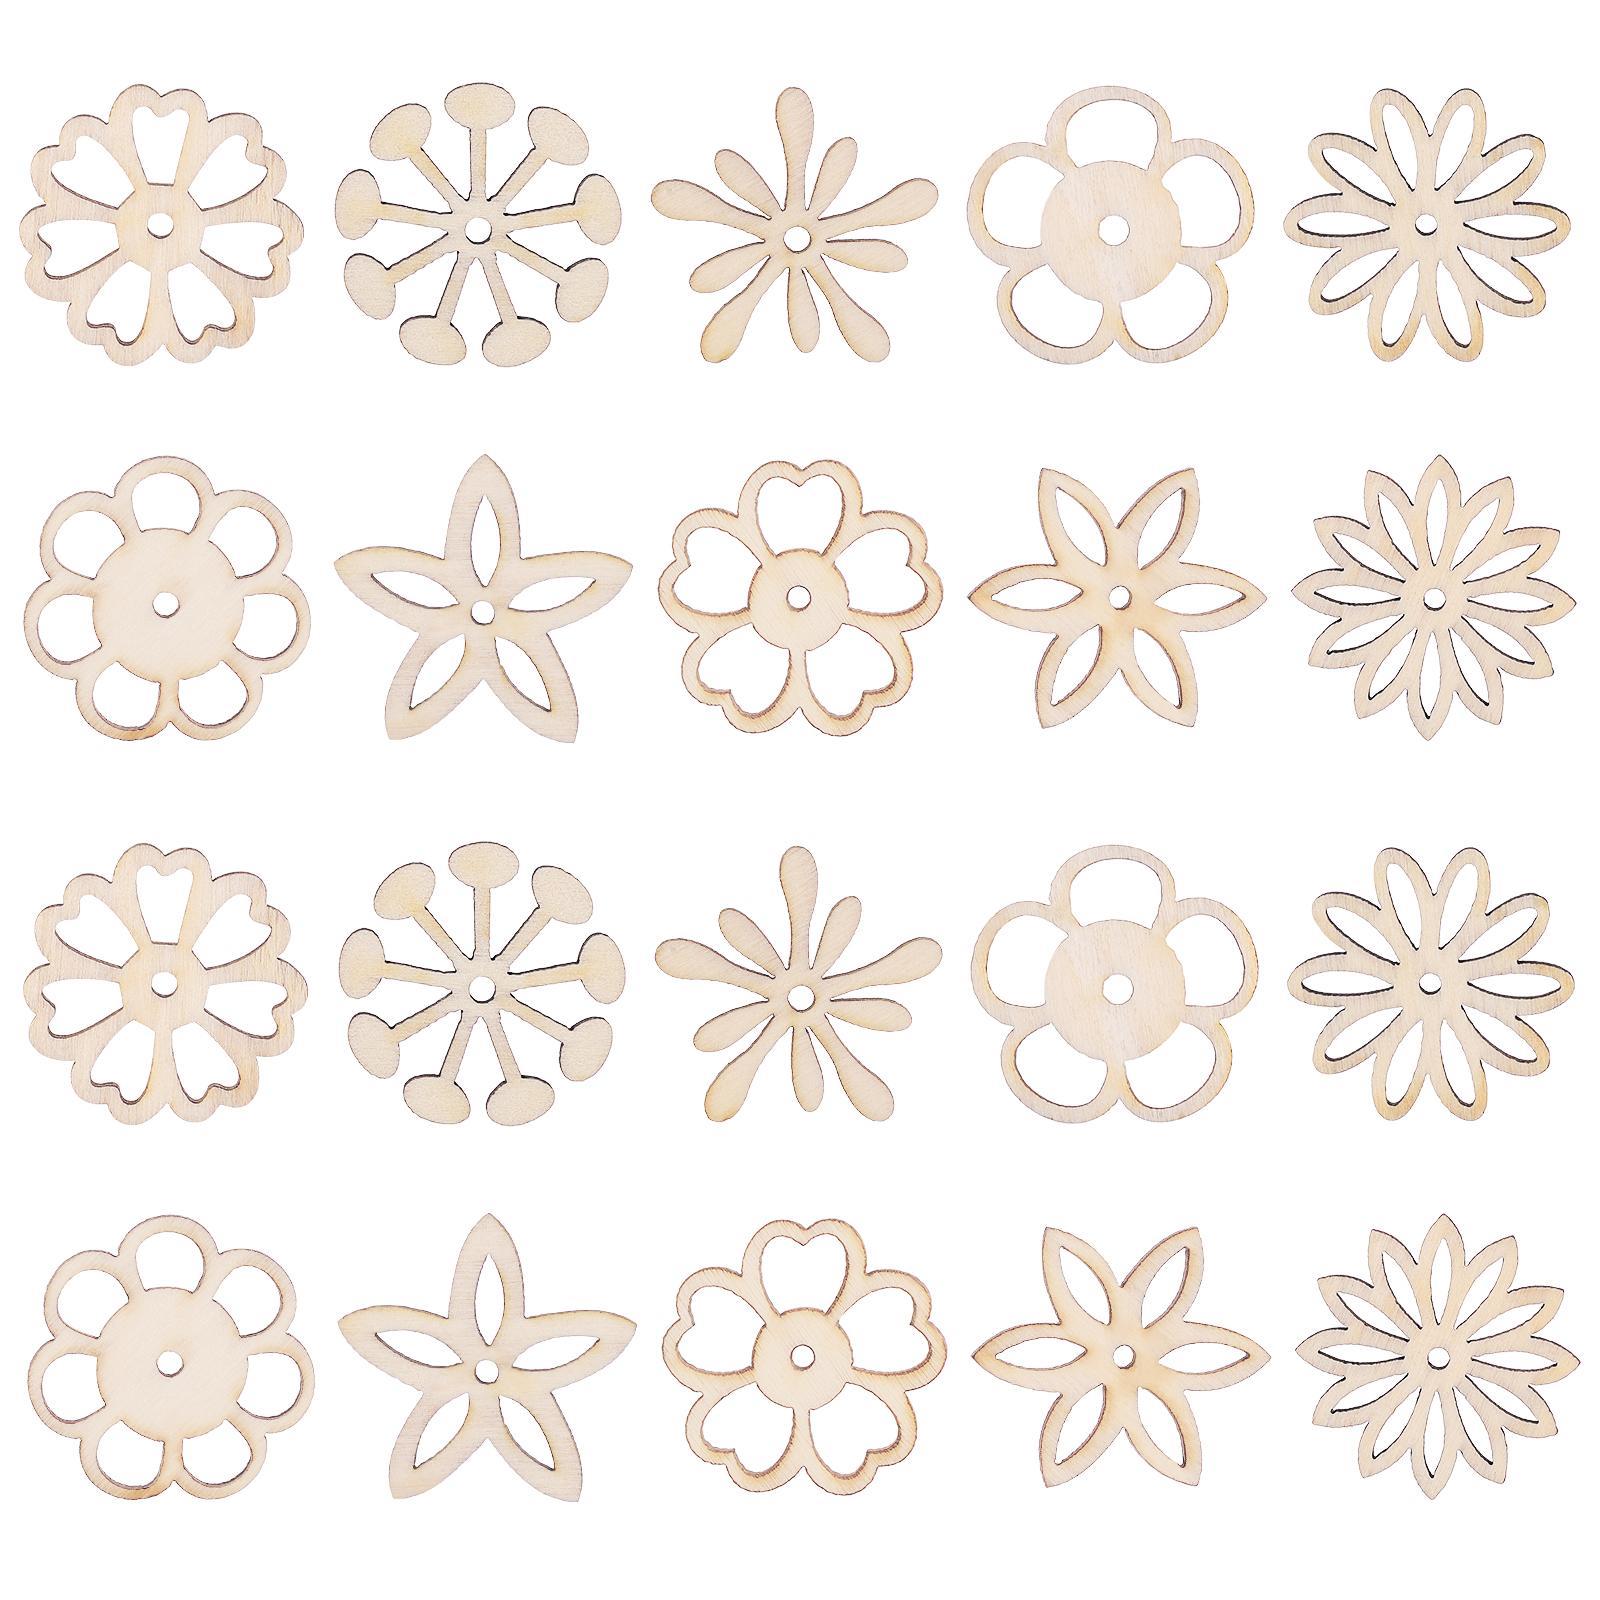 Flower Wooden Slices Cutouts Hanging DIY Art Crafts Party Ornament Blank Chips House Decorations Home